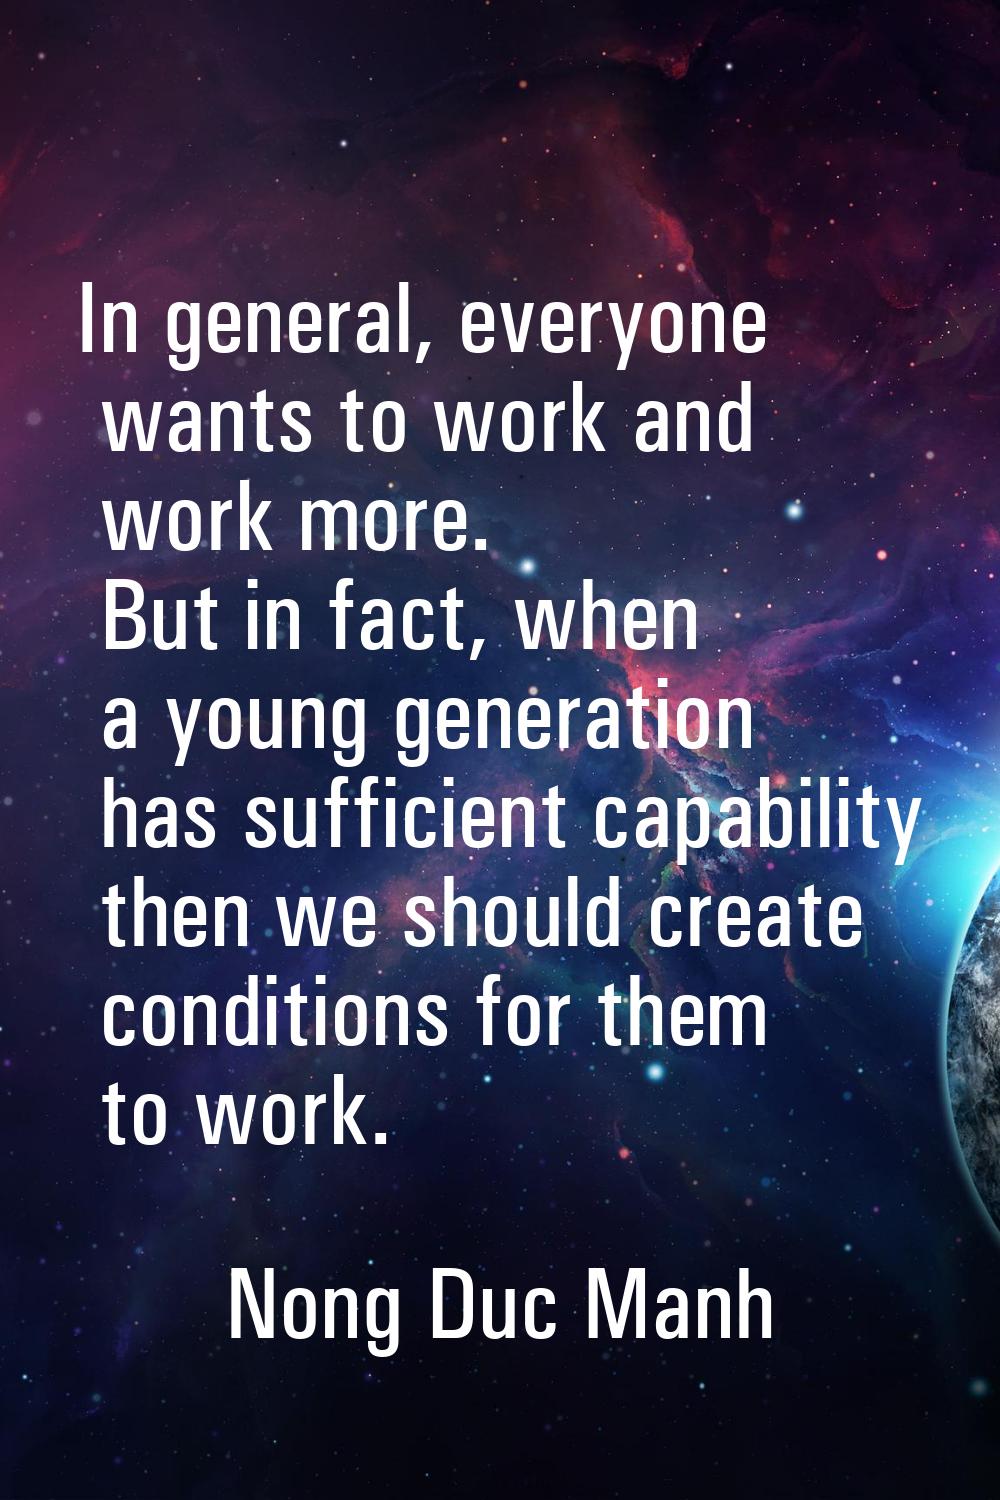 In general, everyone wants to work and work more. But in fact, when a young generation has sufficie